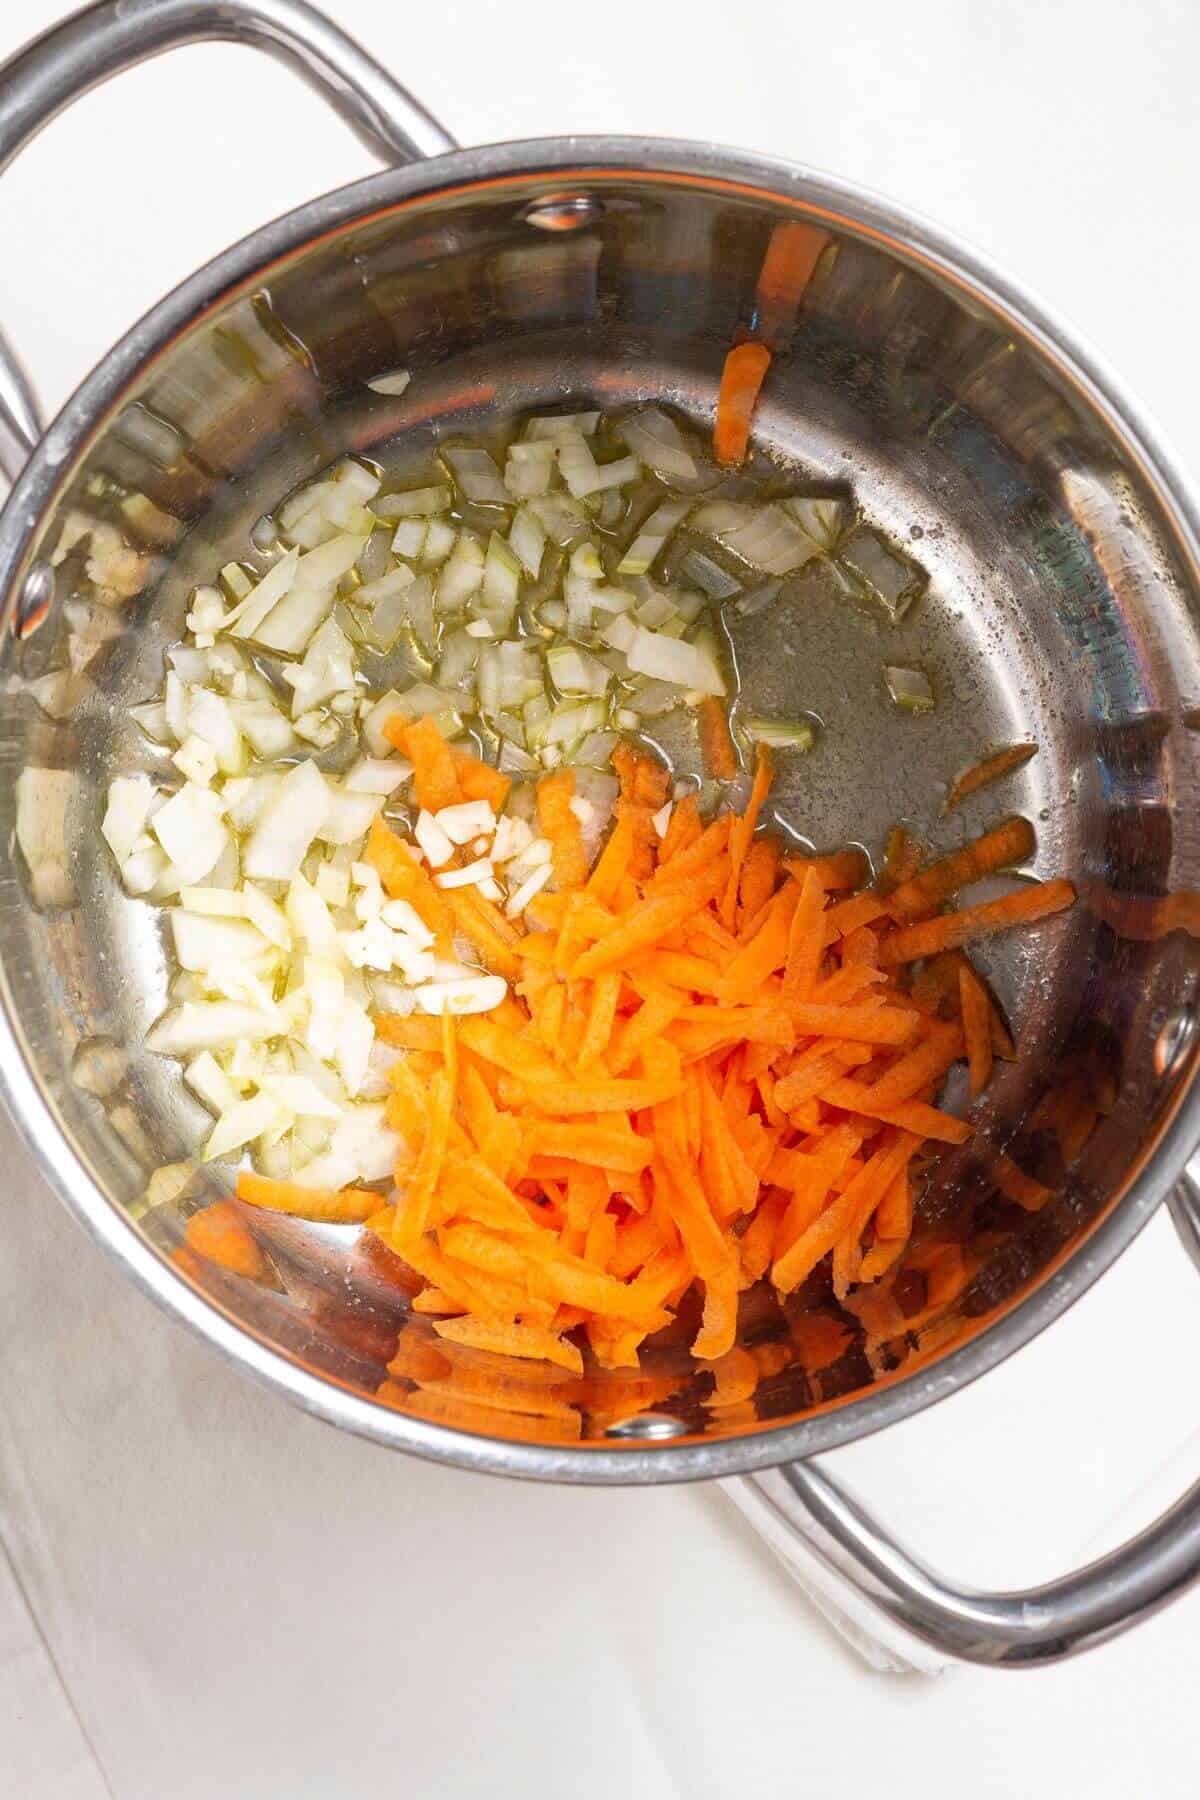 Carrots, onions, and garlic added to soup pot.